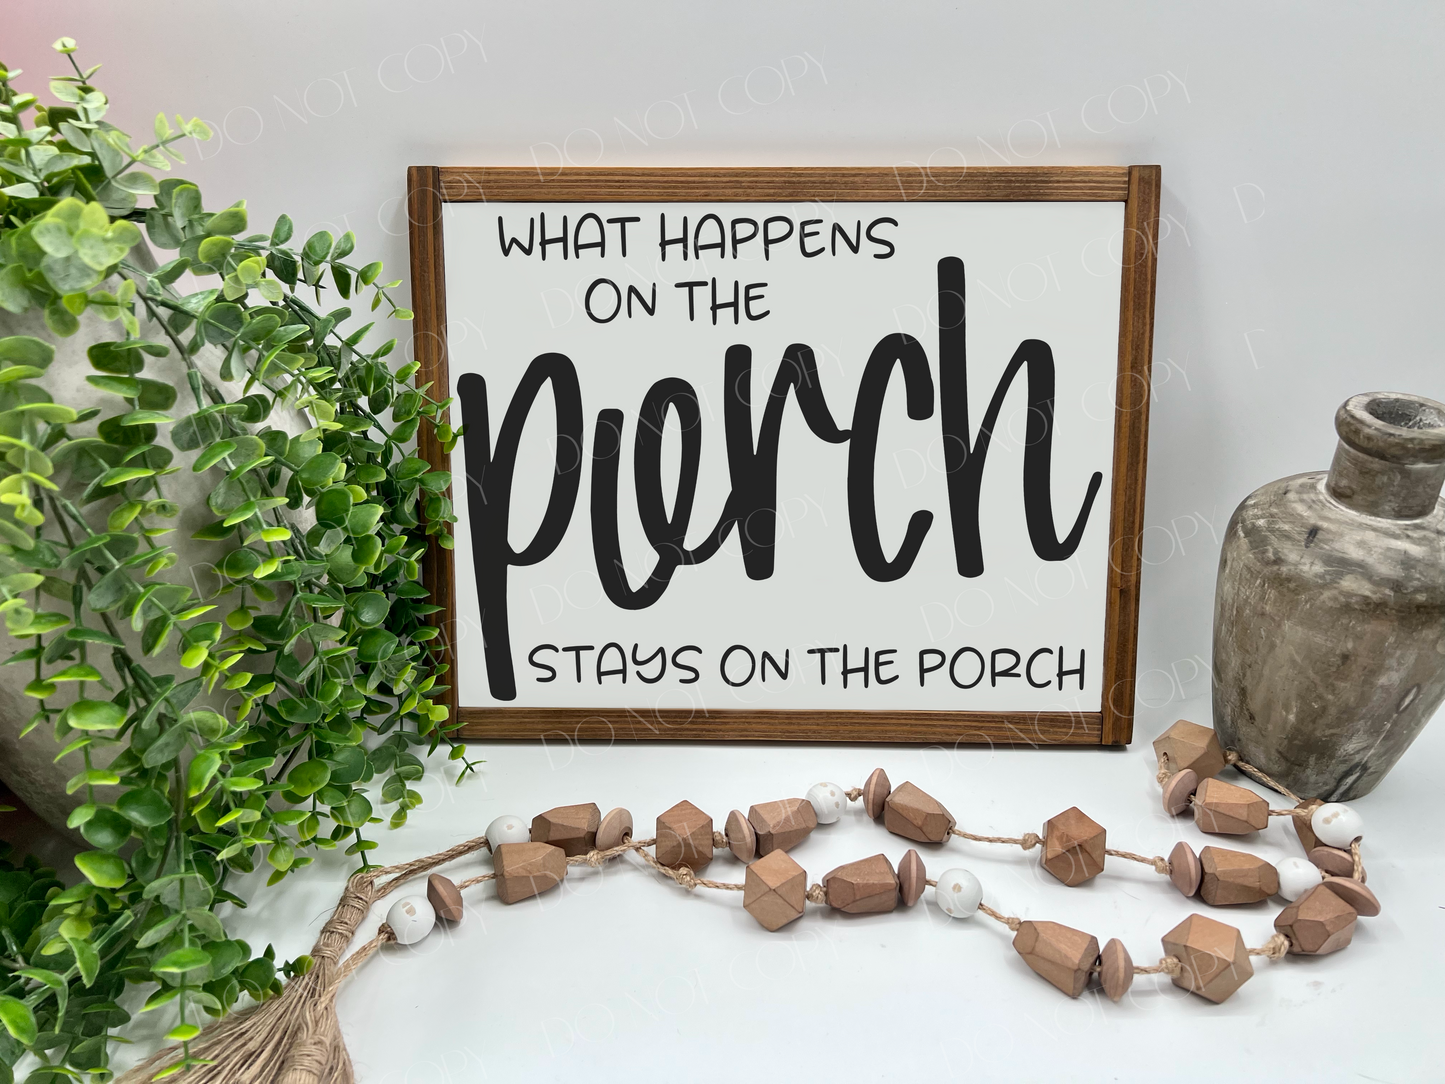 What Happens On The Porch Stays On The Porch - Wood Sign